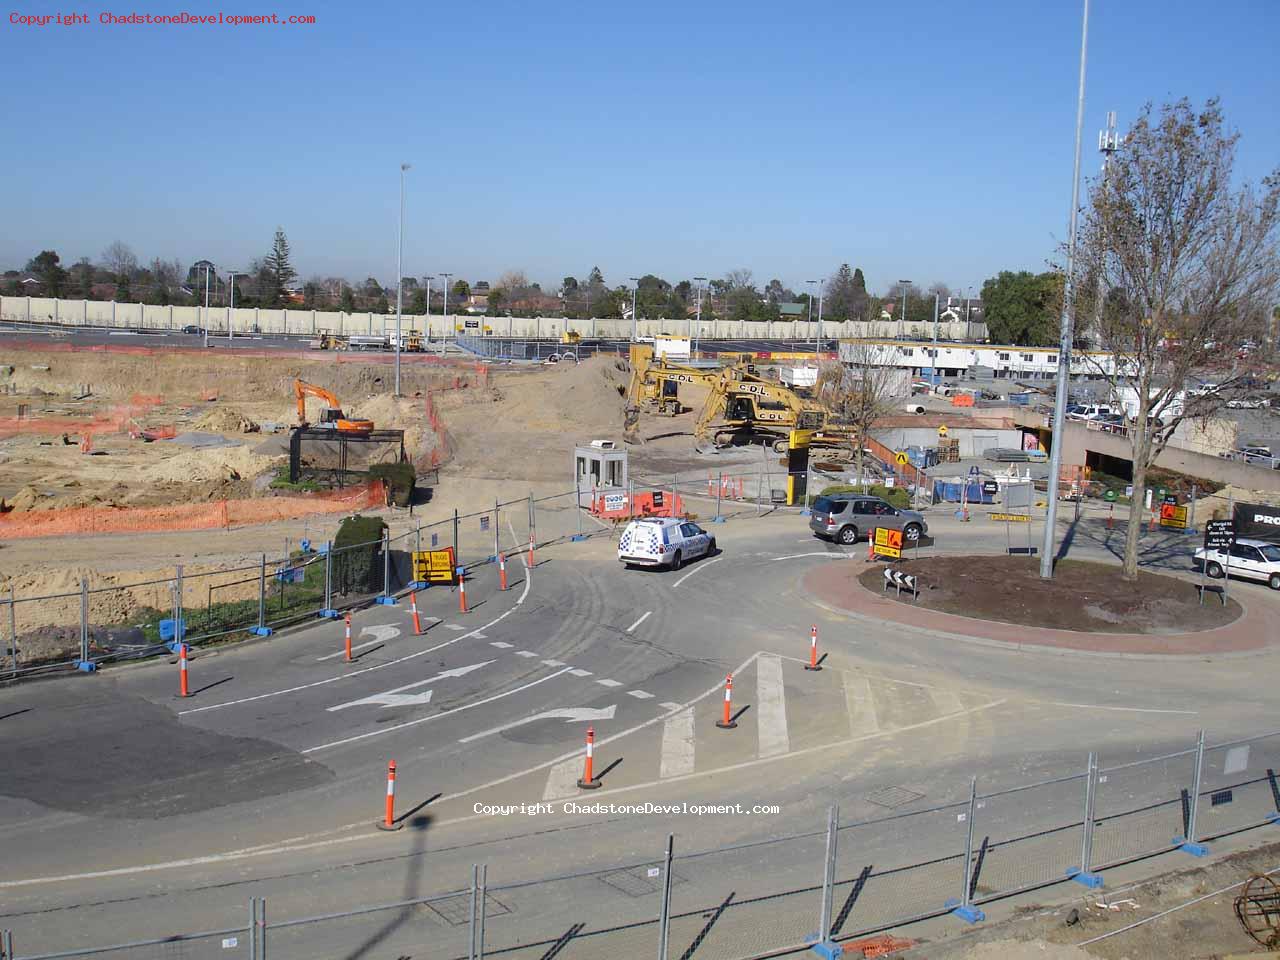 The roundabout, before being dug up - Chadstone Development Discussions